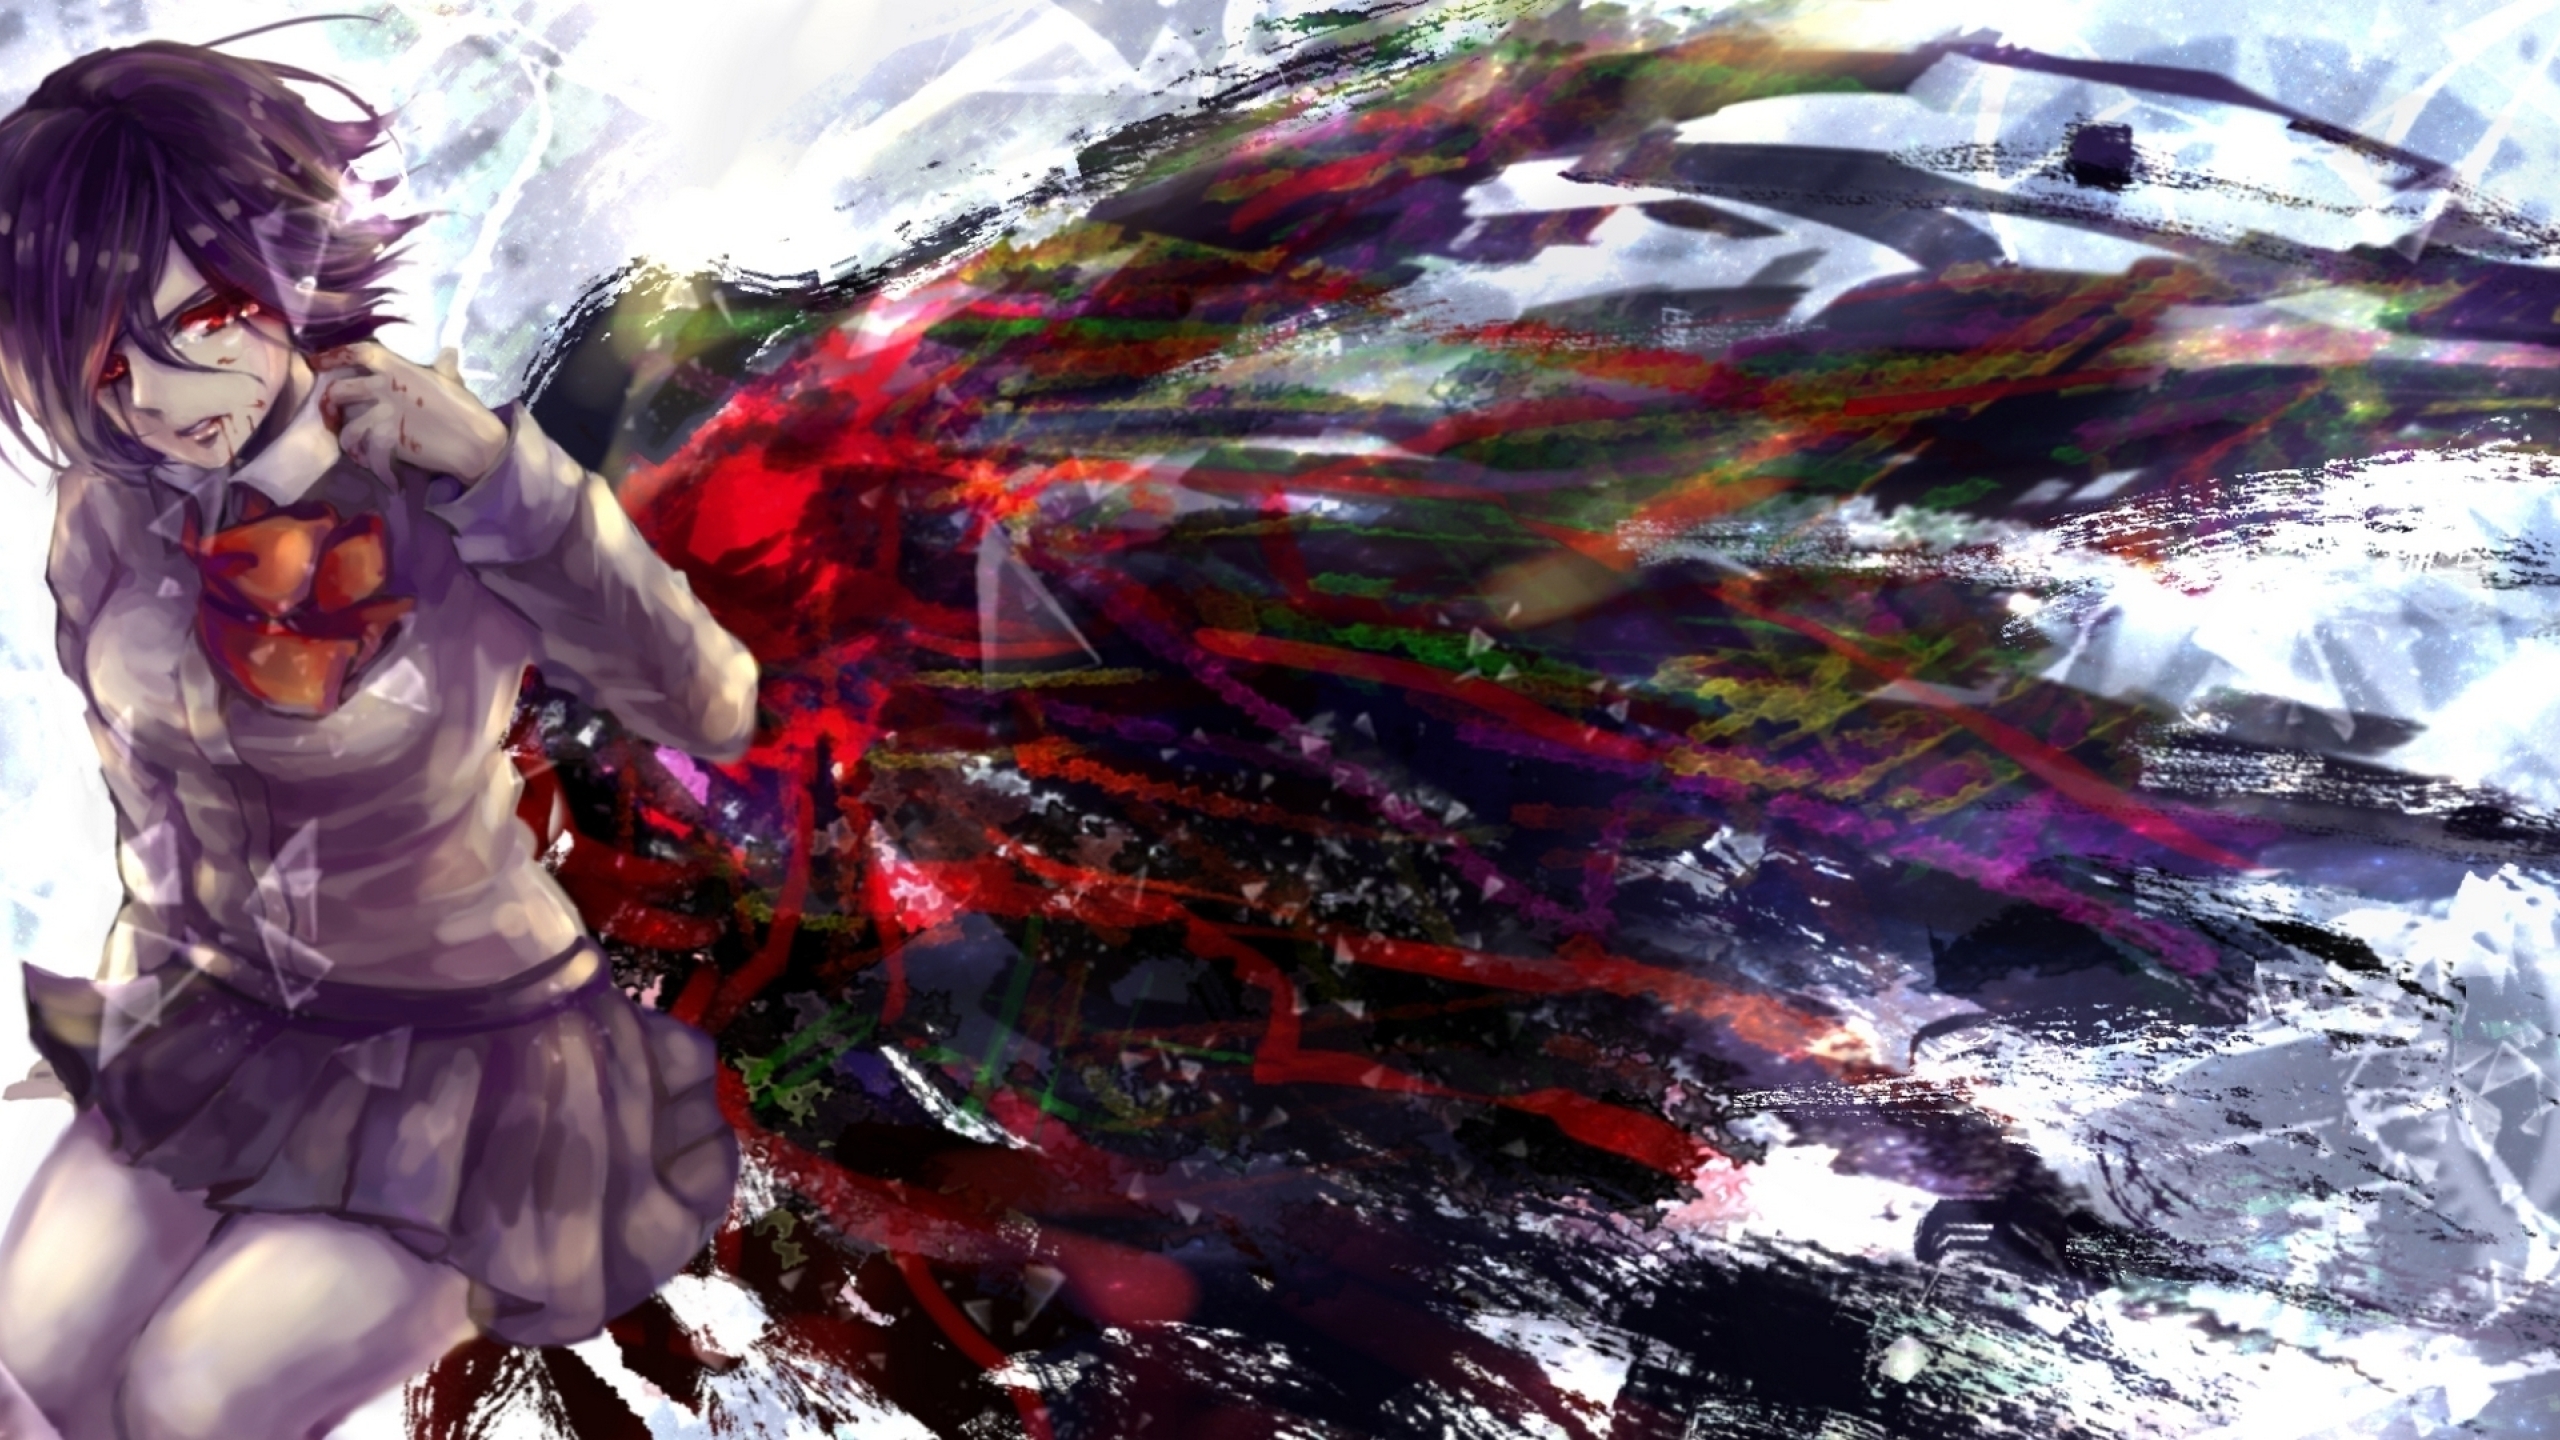 2560x1440 rune mikoto, anime, tokyo ghoul 1440P Resolution Wallpaper, HD Anime 4K Wallpapers ...